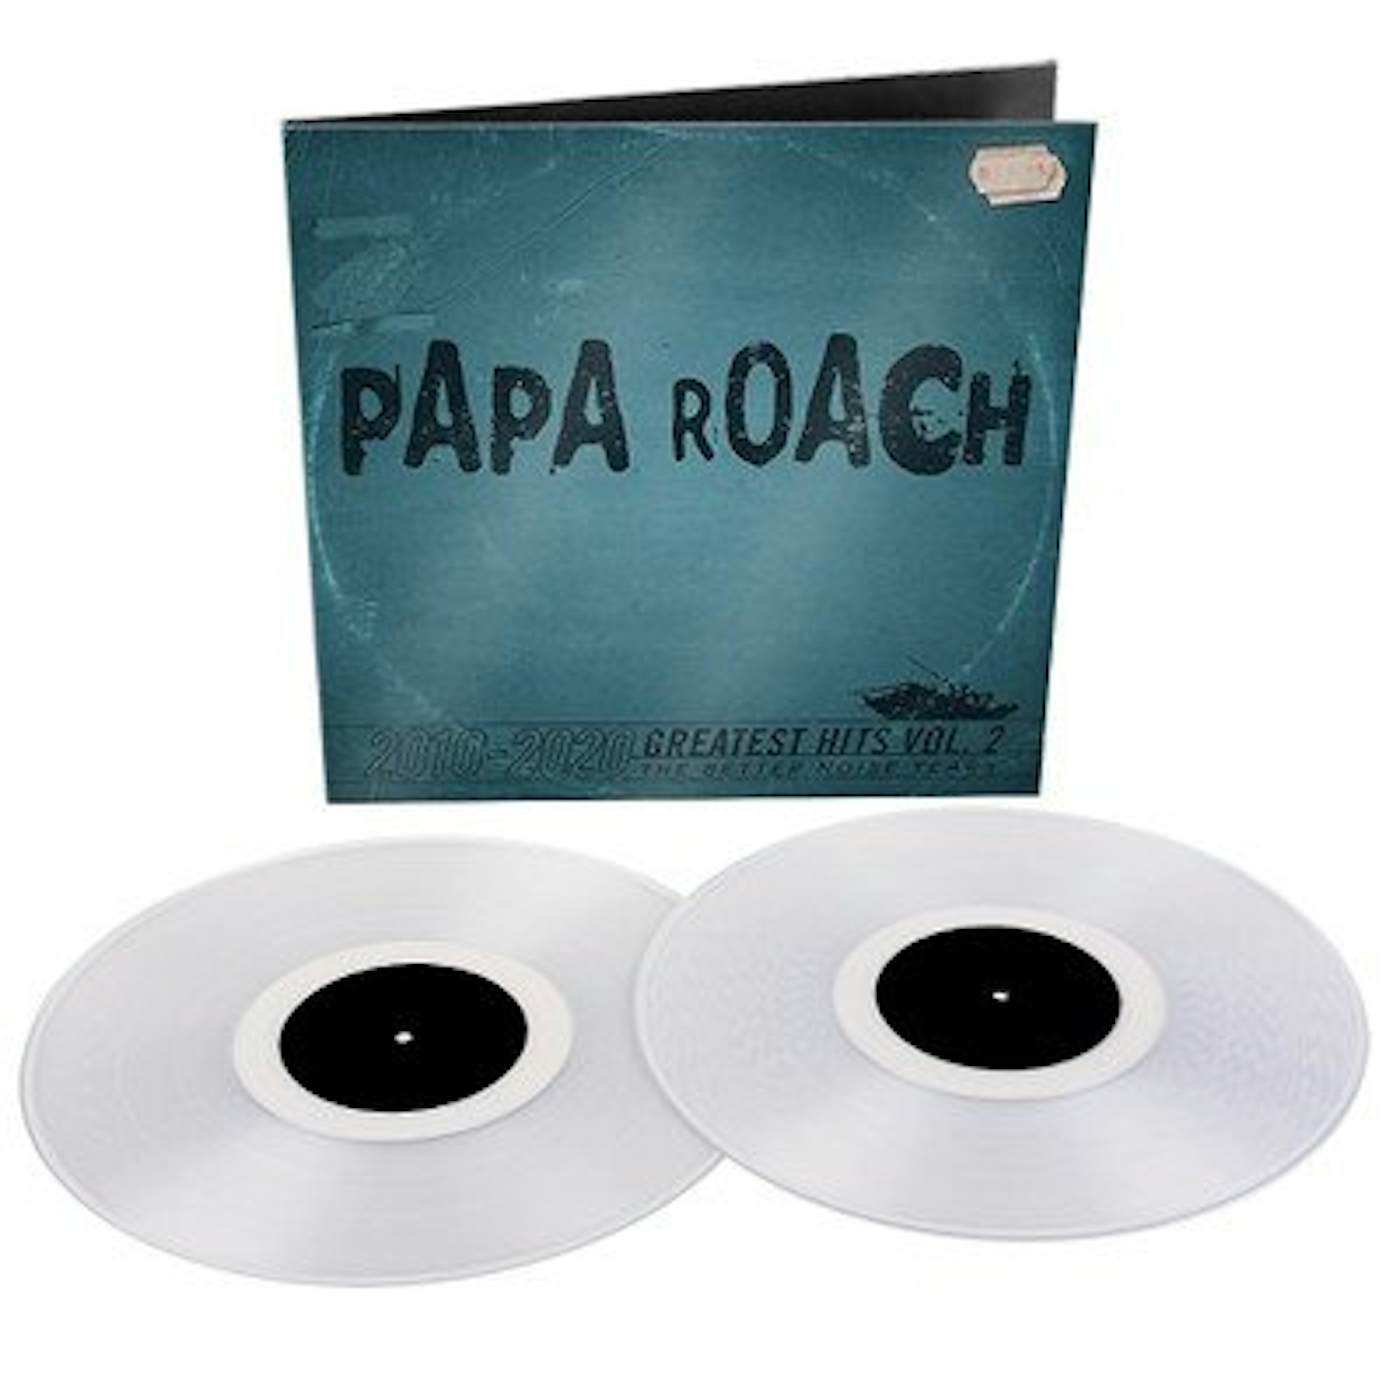 Papa Roach GREATEST HITS VOL. 2 THE BETTER NOISE YEARS (US) Vinyl Record